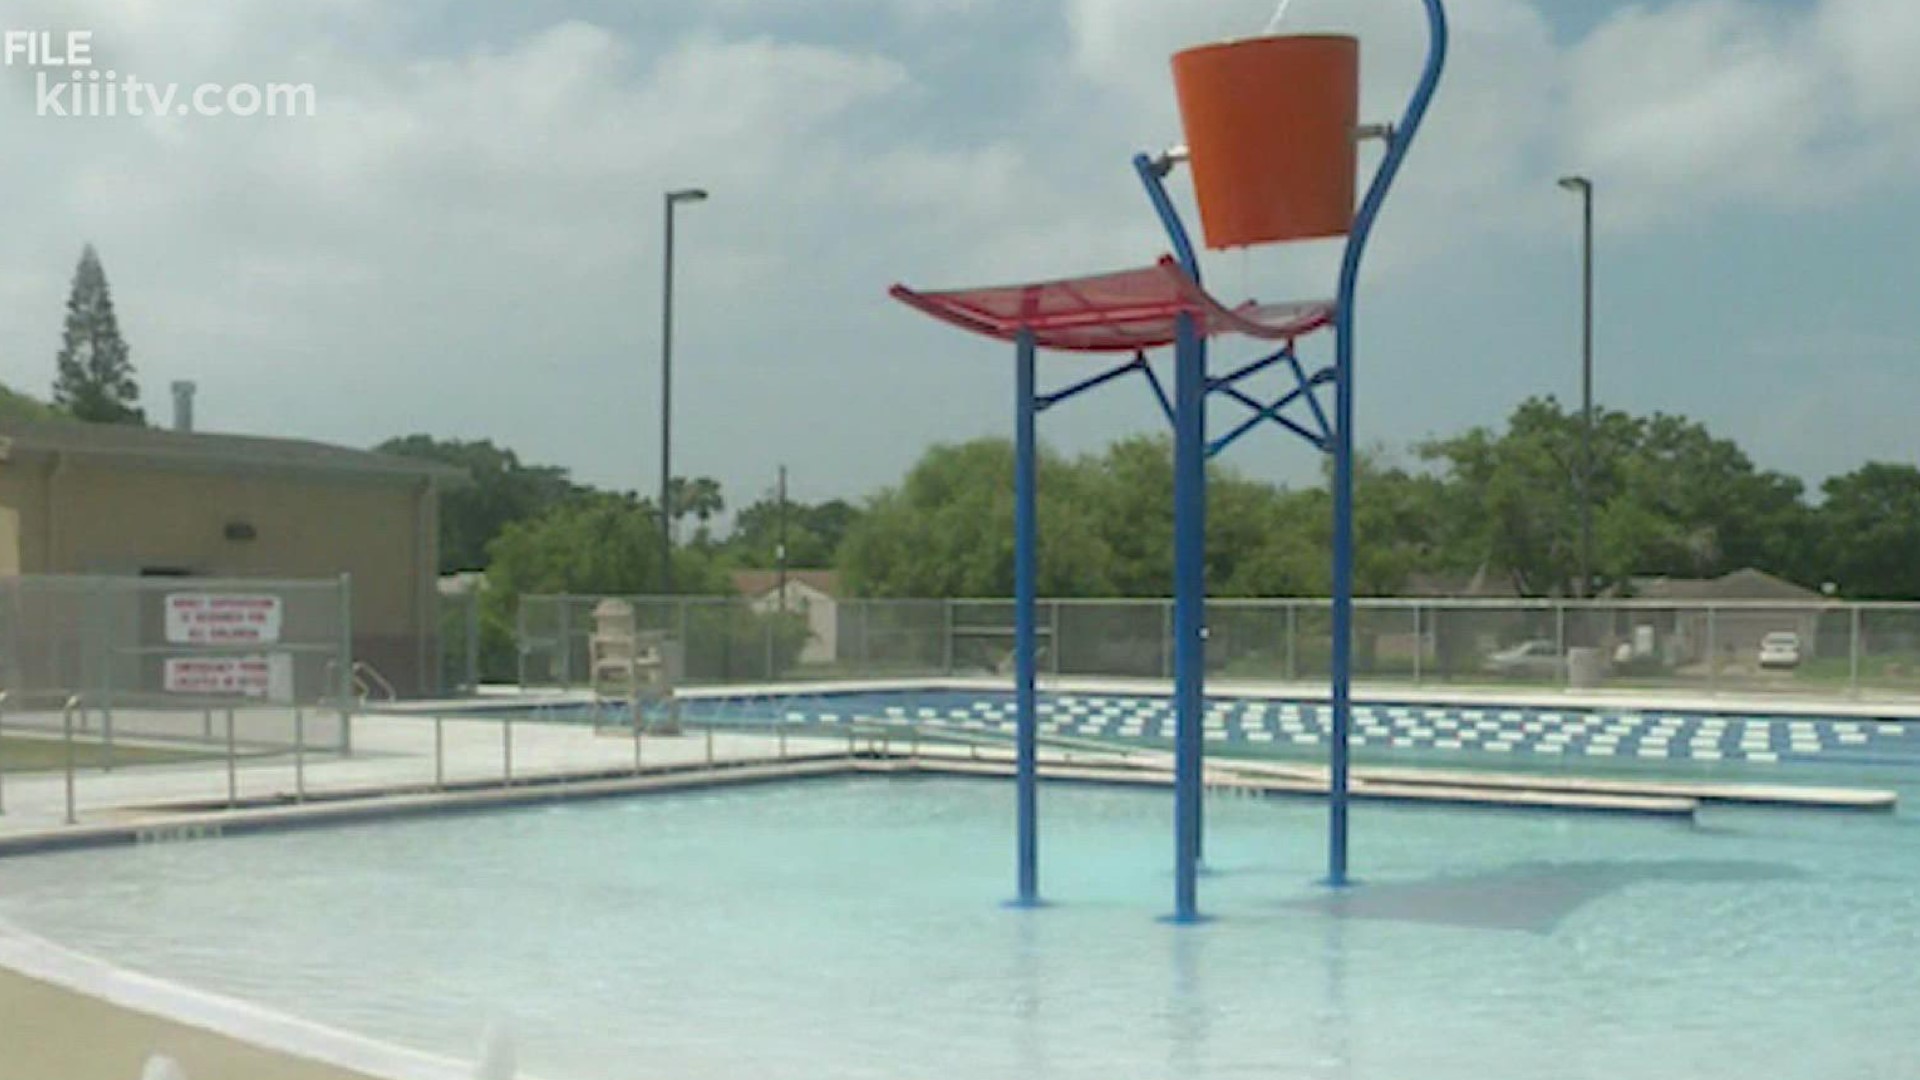 Admission to city pools is free and lifeguards will be on duty.